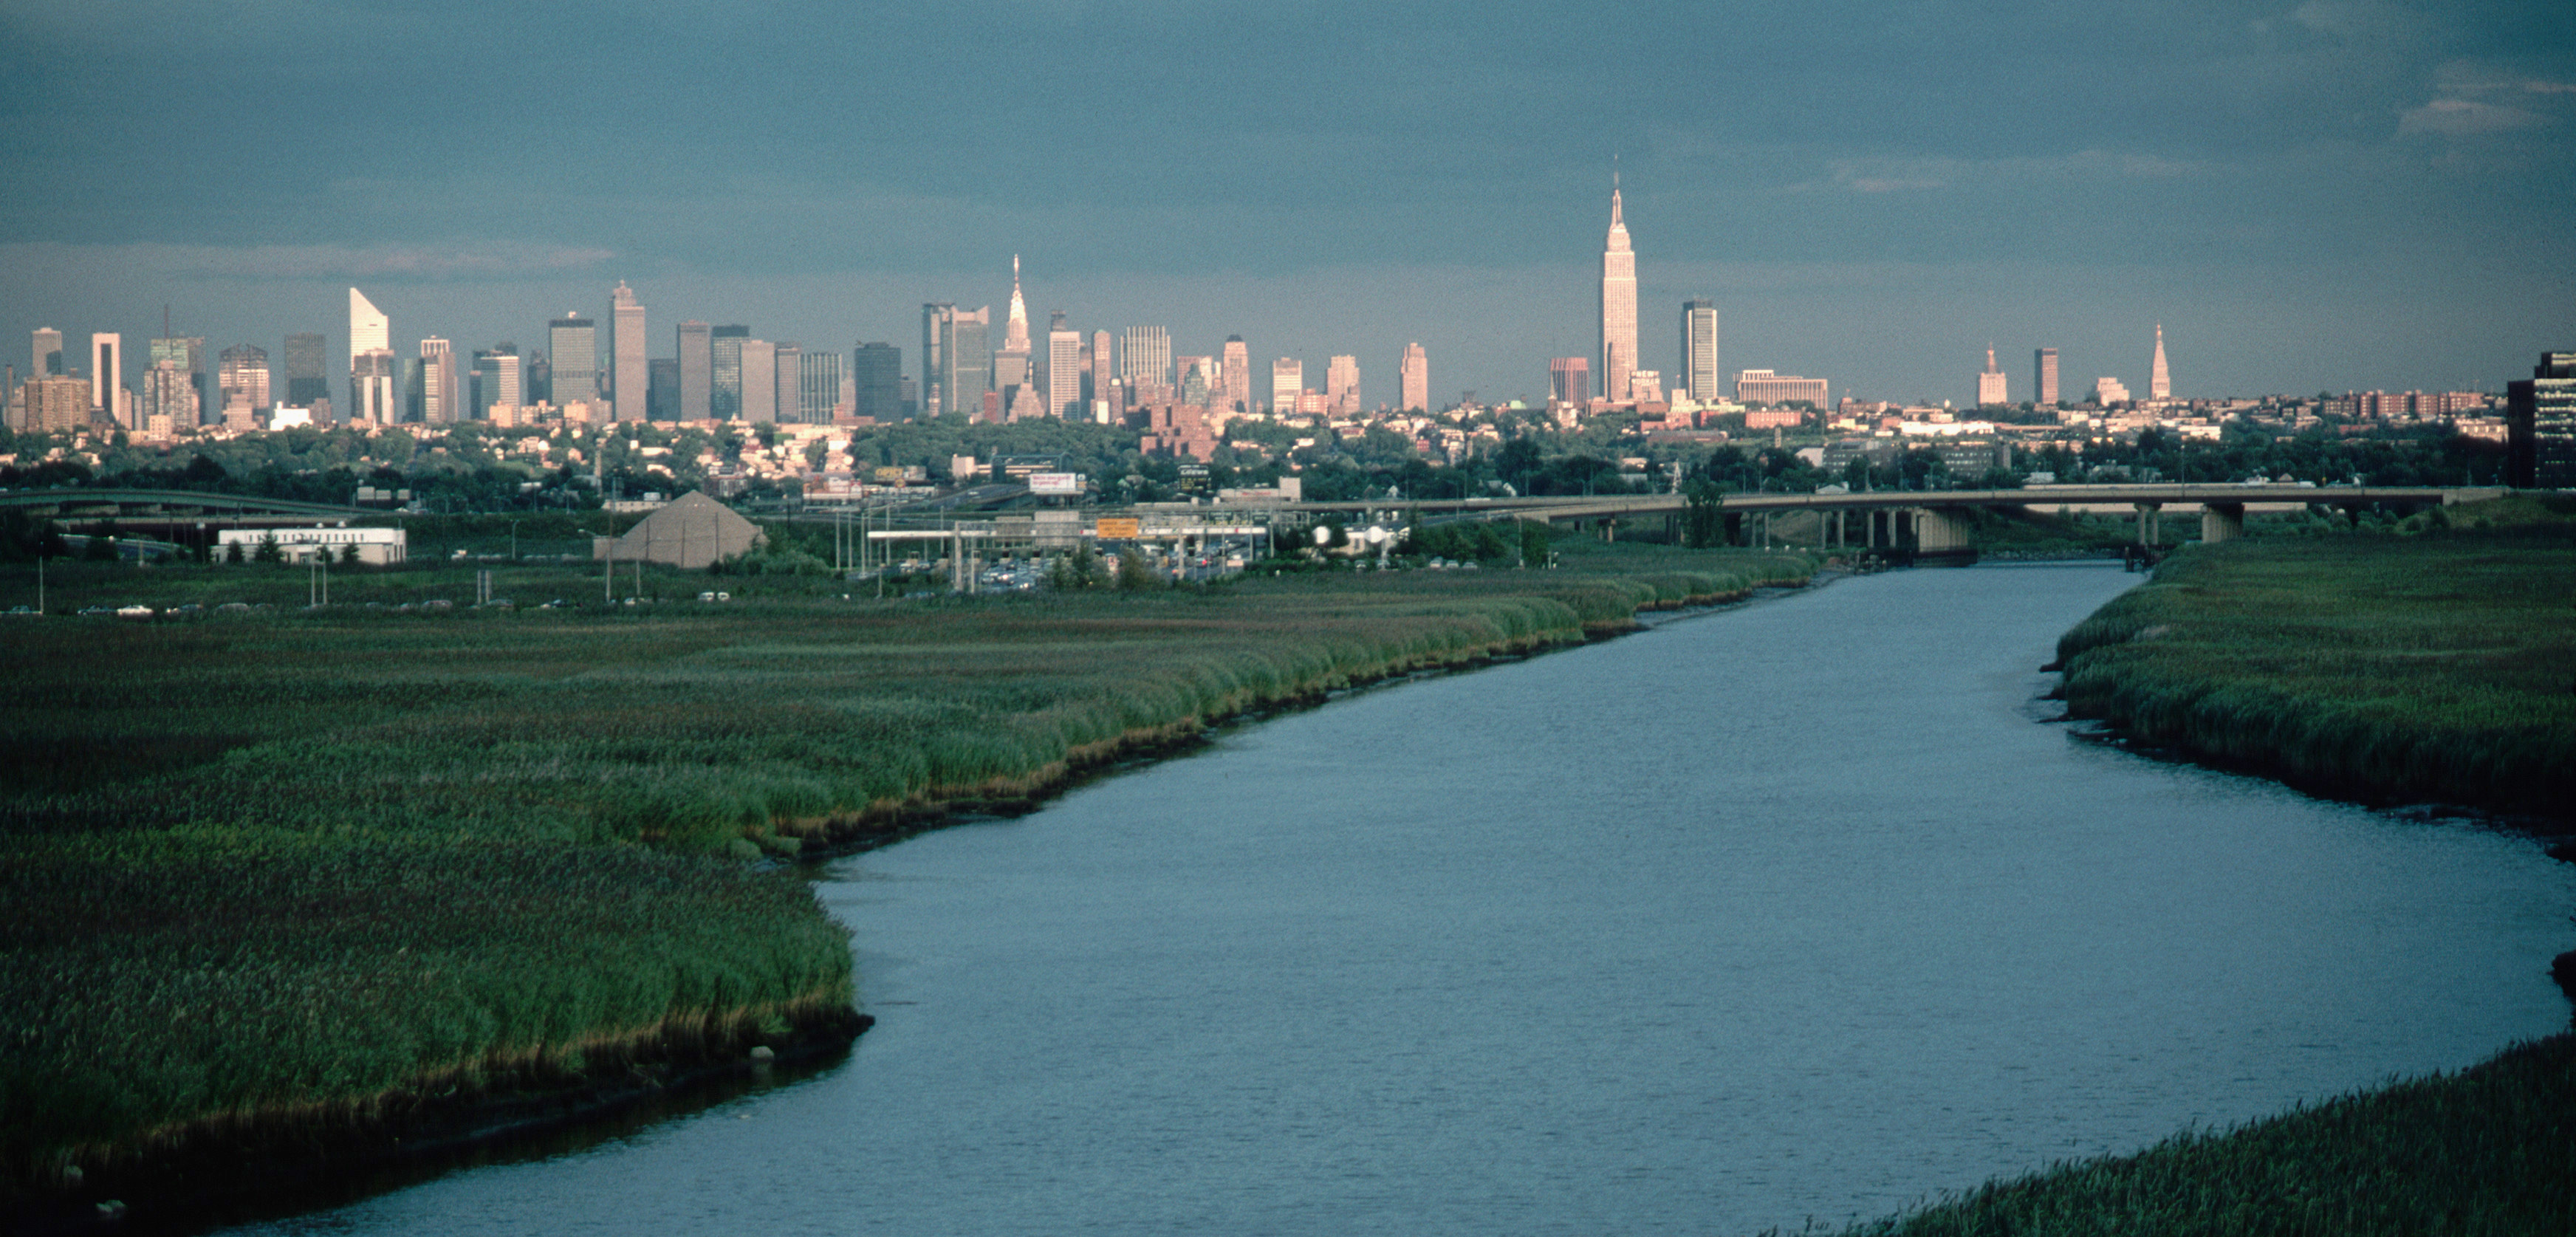 The New Jersey Meadowlands circa 1982. Photo © Kelly-Mooney Photography/Corbis